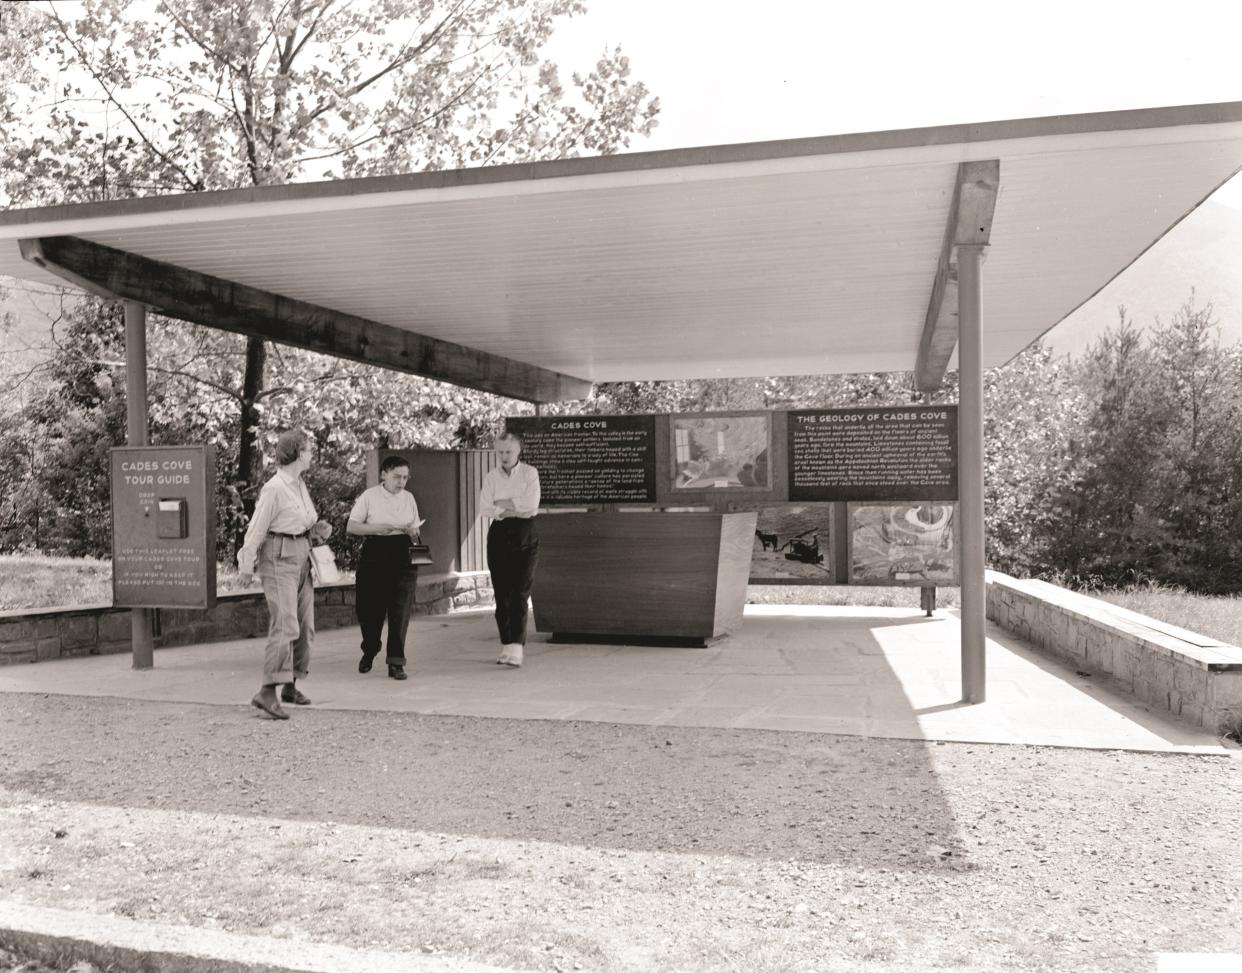 The Cades Cove Orientation Facility (shown here in 1959) was an ideal place to debut the new interpretive materials developed by the Great Smoky Mountains Natural History Association. The box on the left reads, “Use this leaflet free on your Cades Cove tour or if you wish to keep it please put 10¢ in the box.”